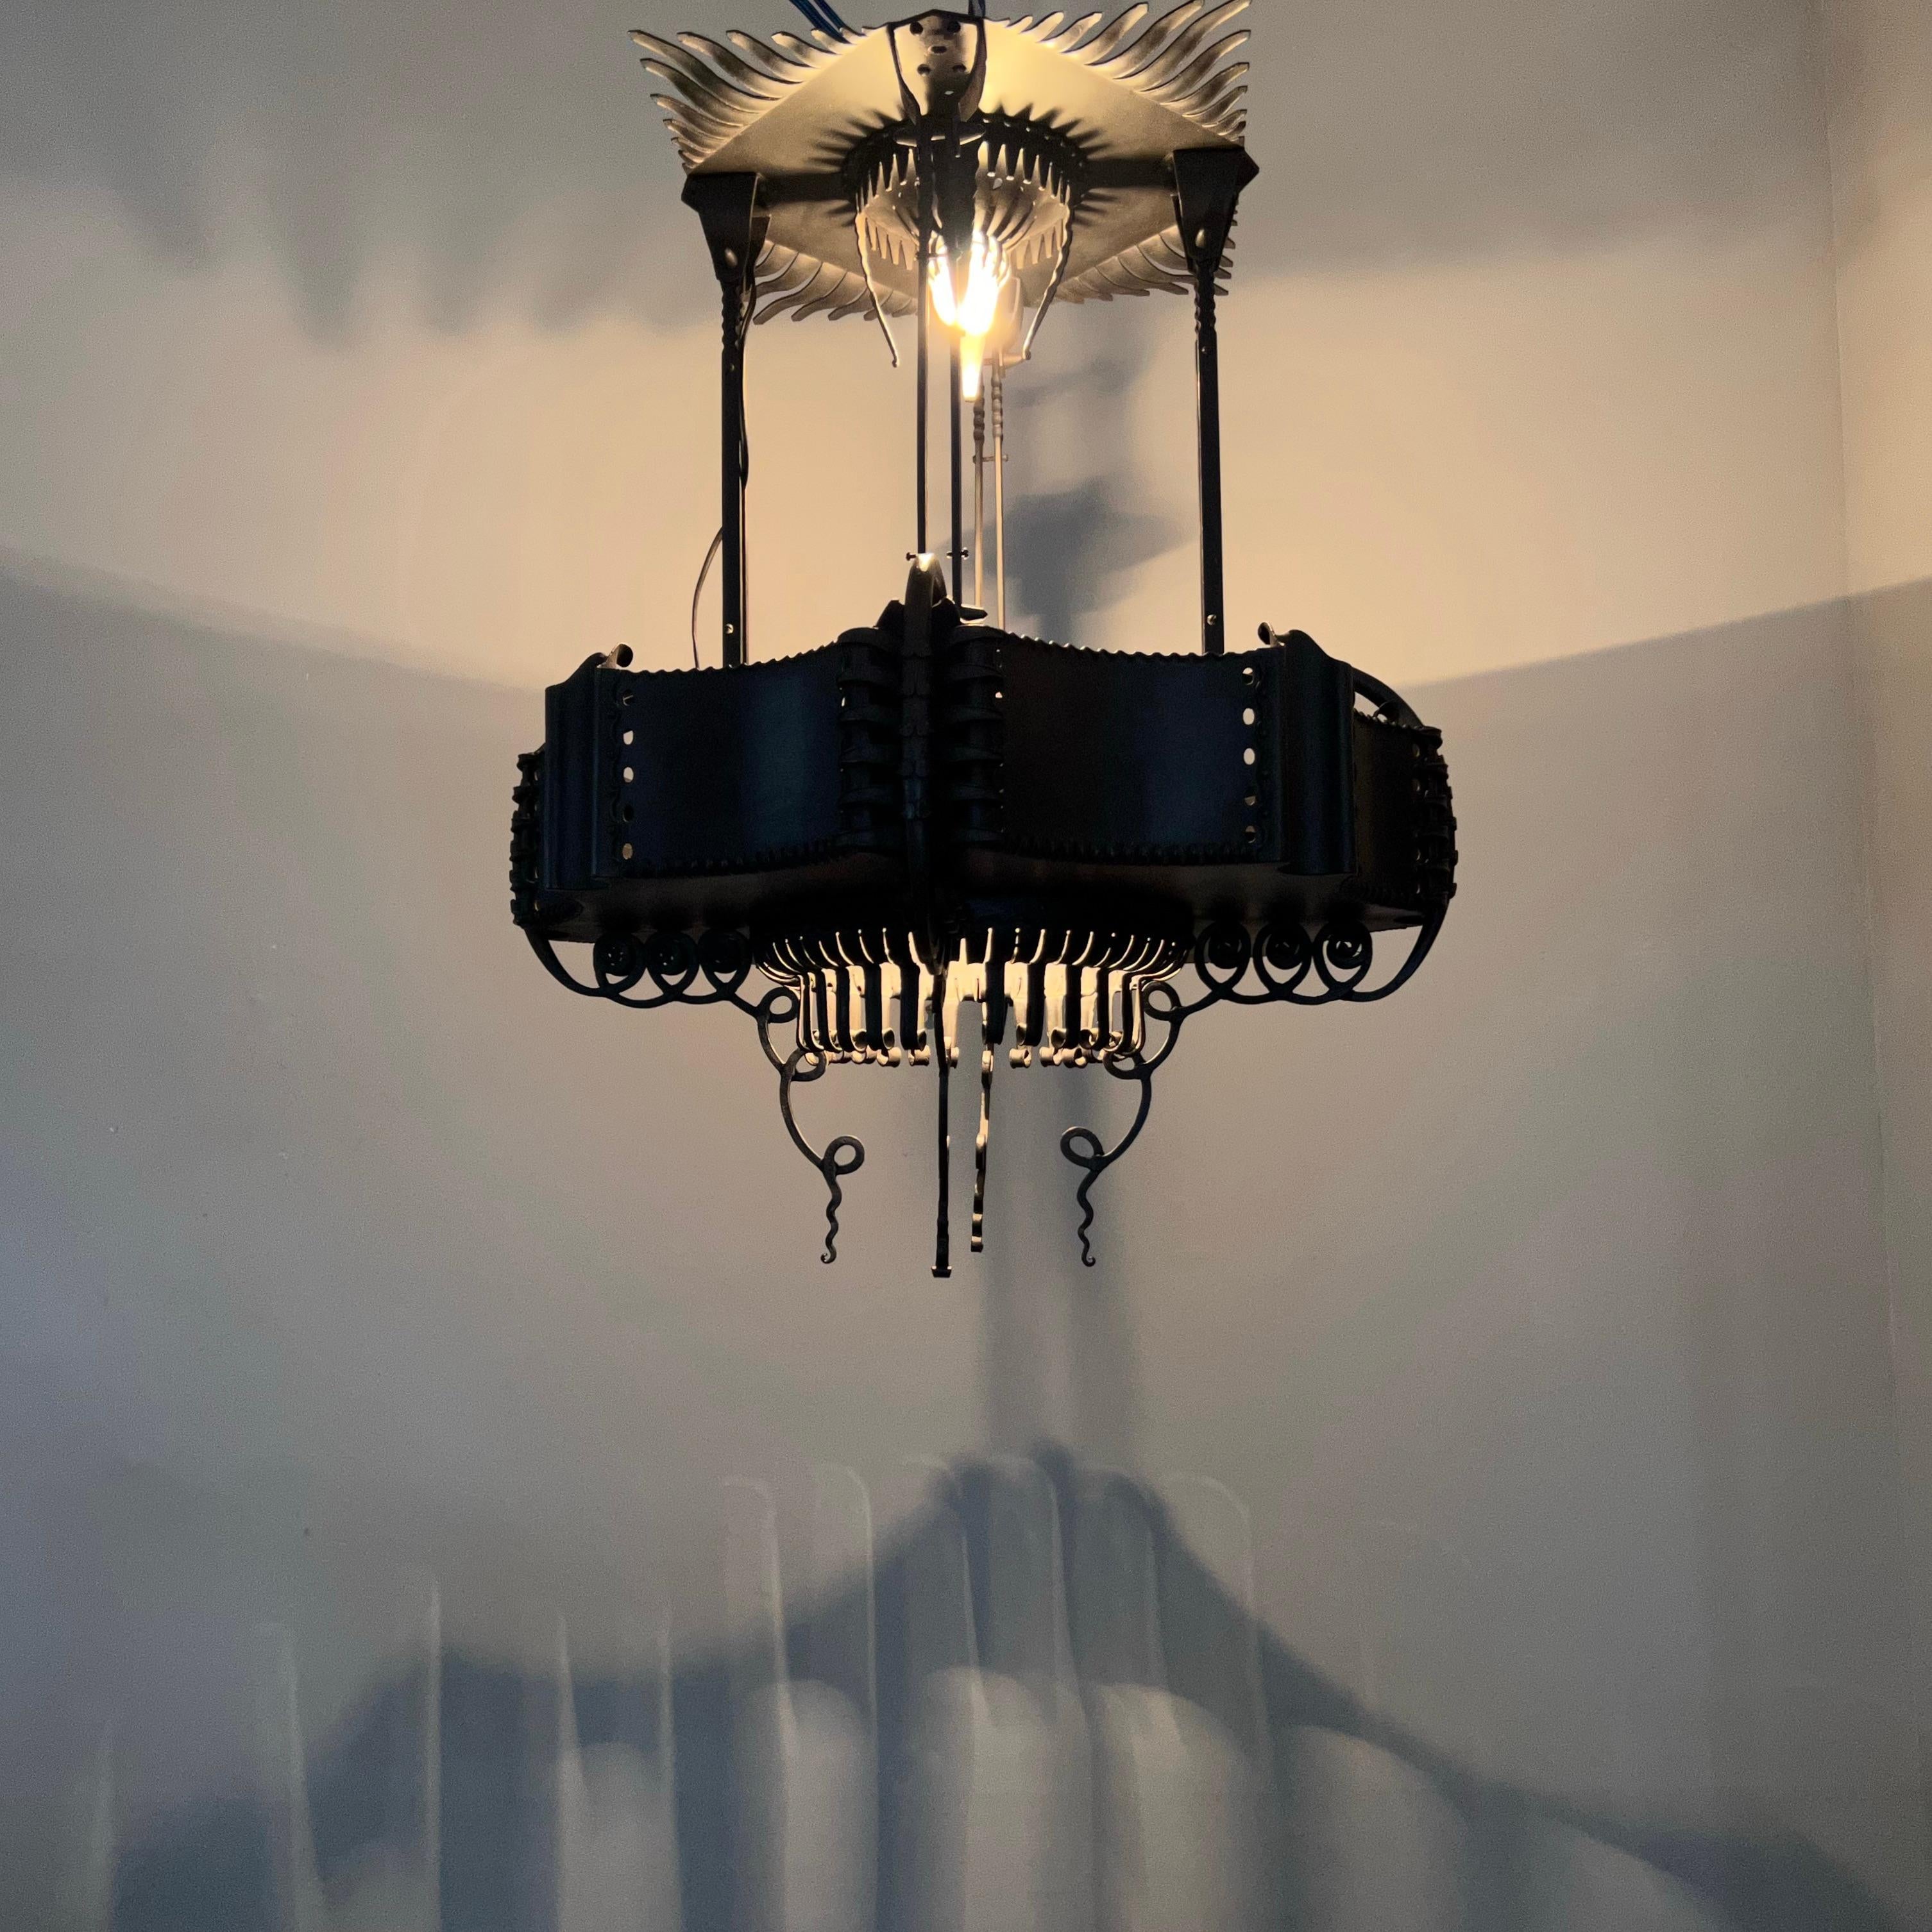 Amazing and skillfully made, Dutch Amsterdamse School wrought iron pendant light.

Michel de Klerk (1884-1924) is considered the most important architect and designer of the Dutch Amsterdam School era. His designs were and still are among the most